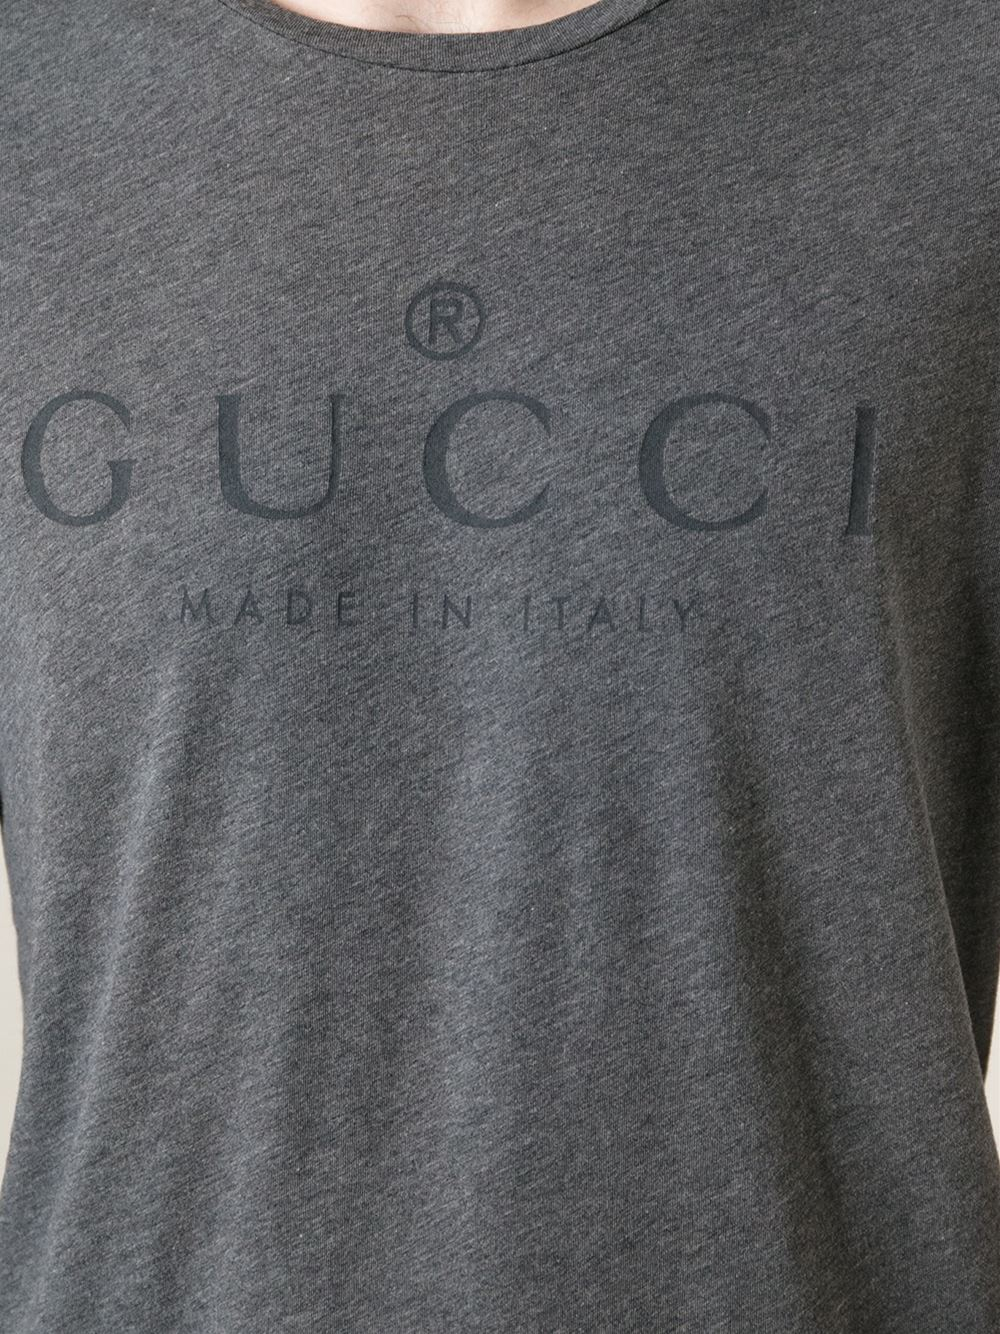 Gucci Printed T-shirt in Grey (Gray) for Men - Lyst